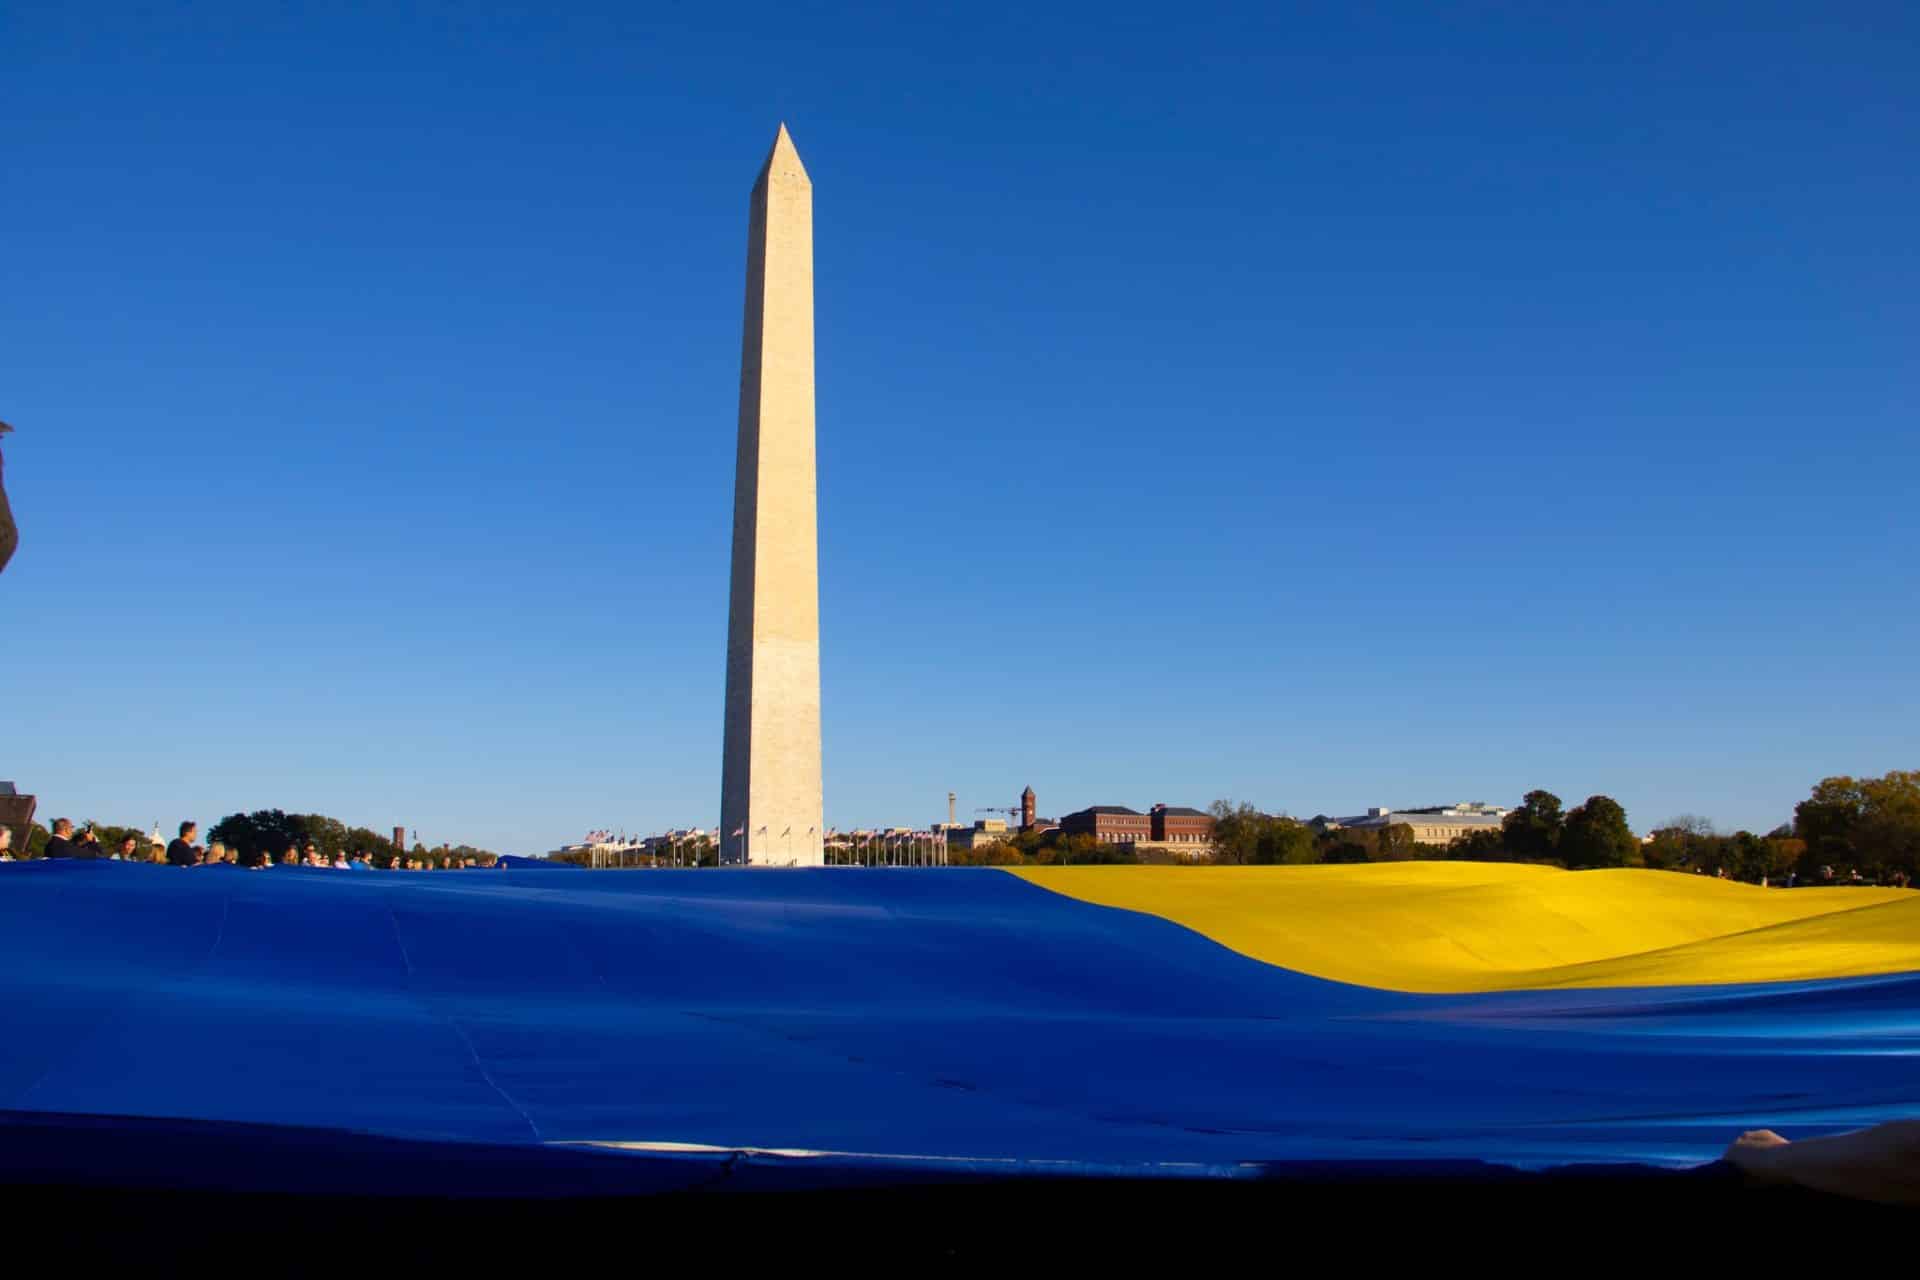 The largest Ukrainian flag in the world